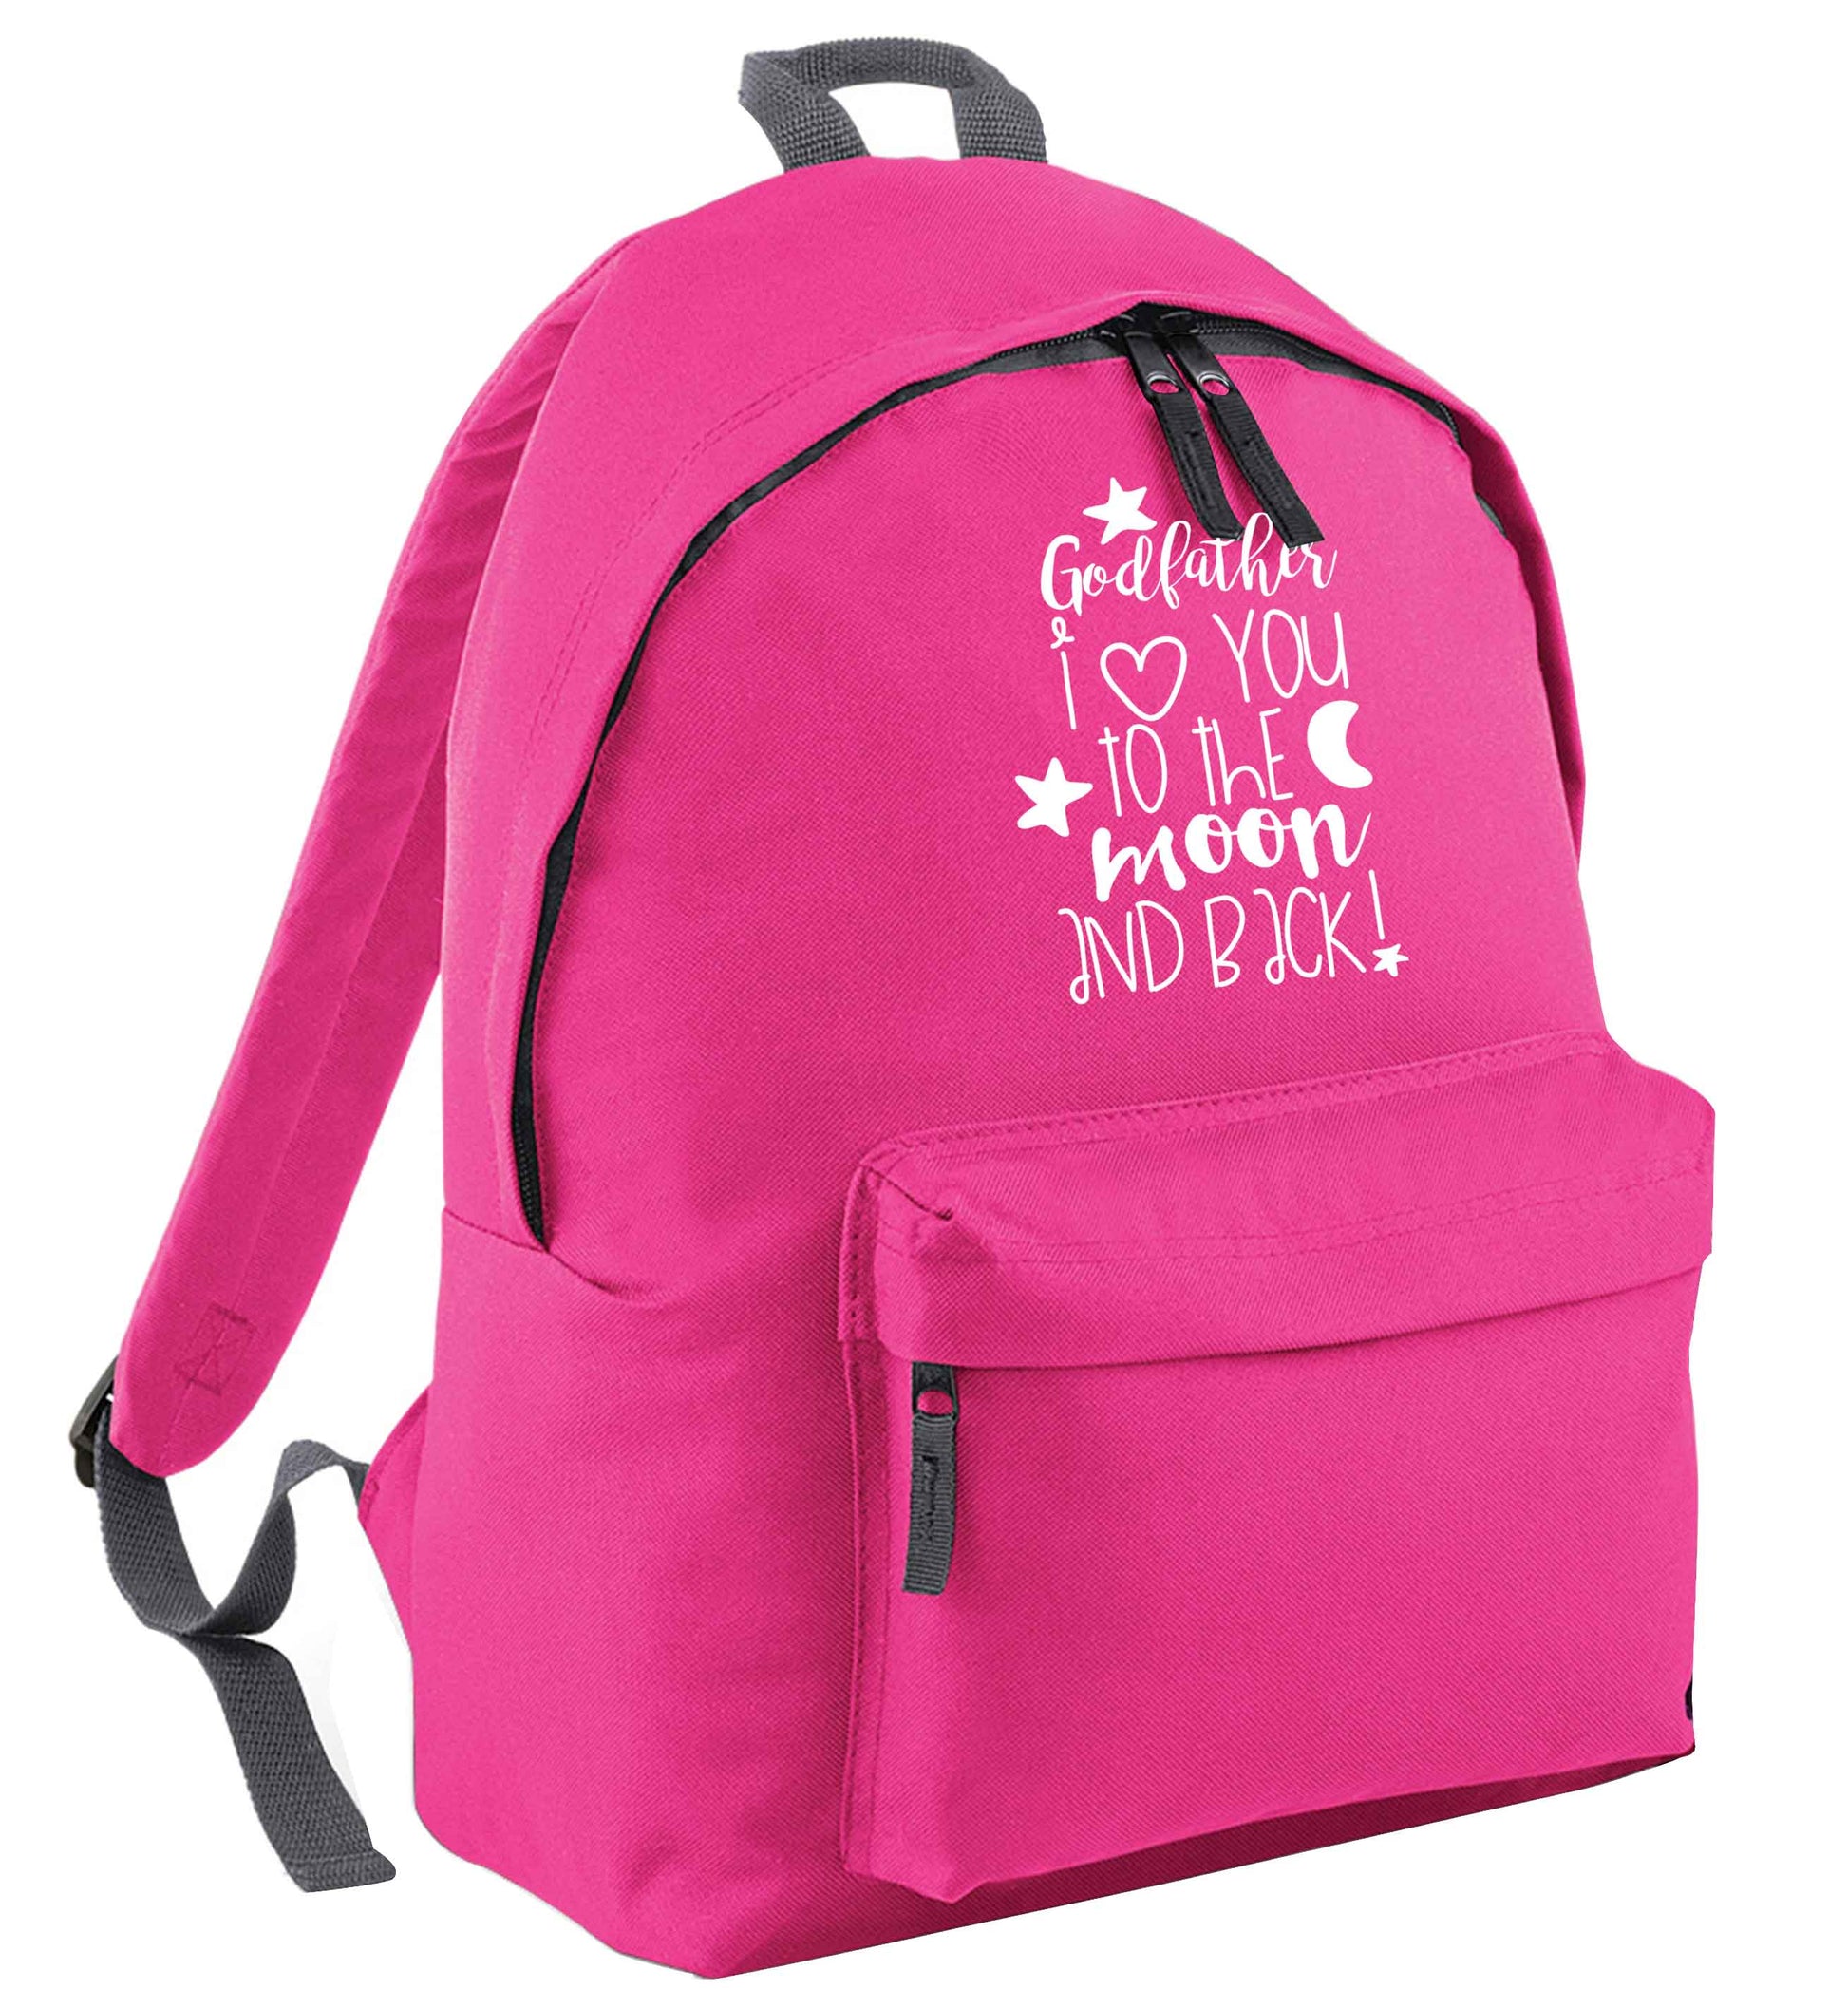 Godfather I love you to the moon and back pink adults backpack